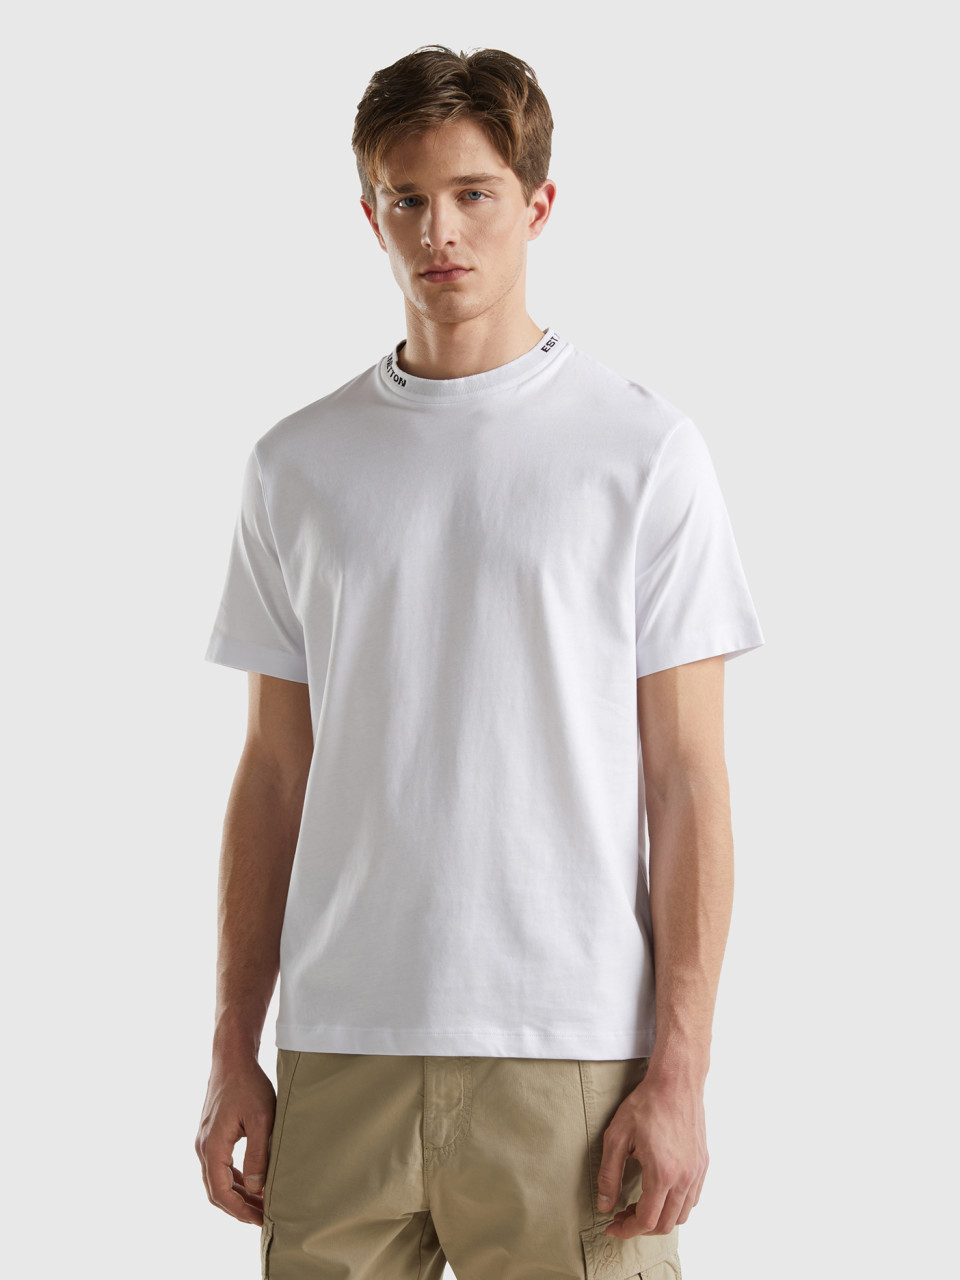 Benetton, White T-shirt With Embroidery On The Neck, White, Men